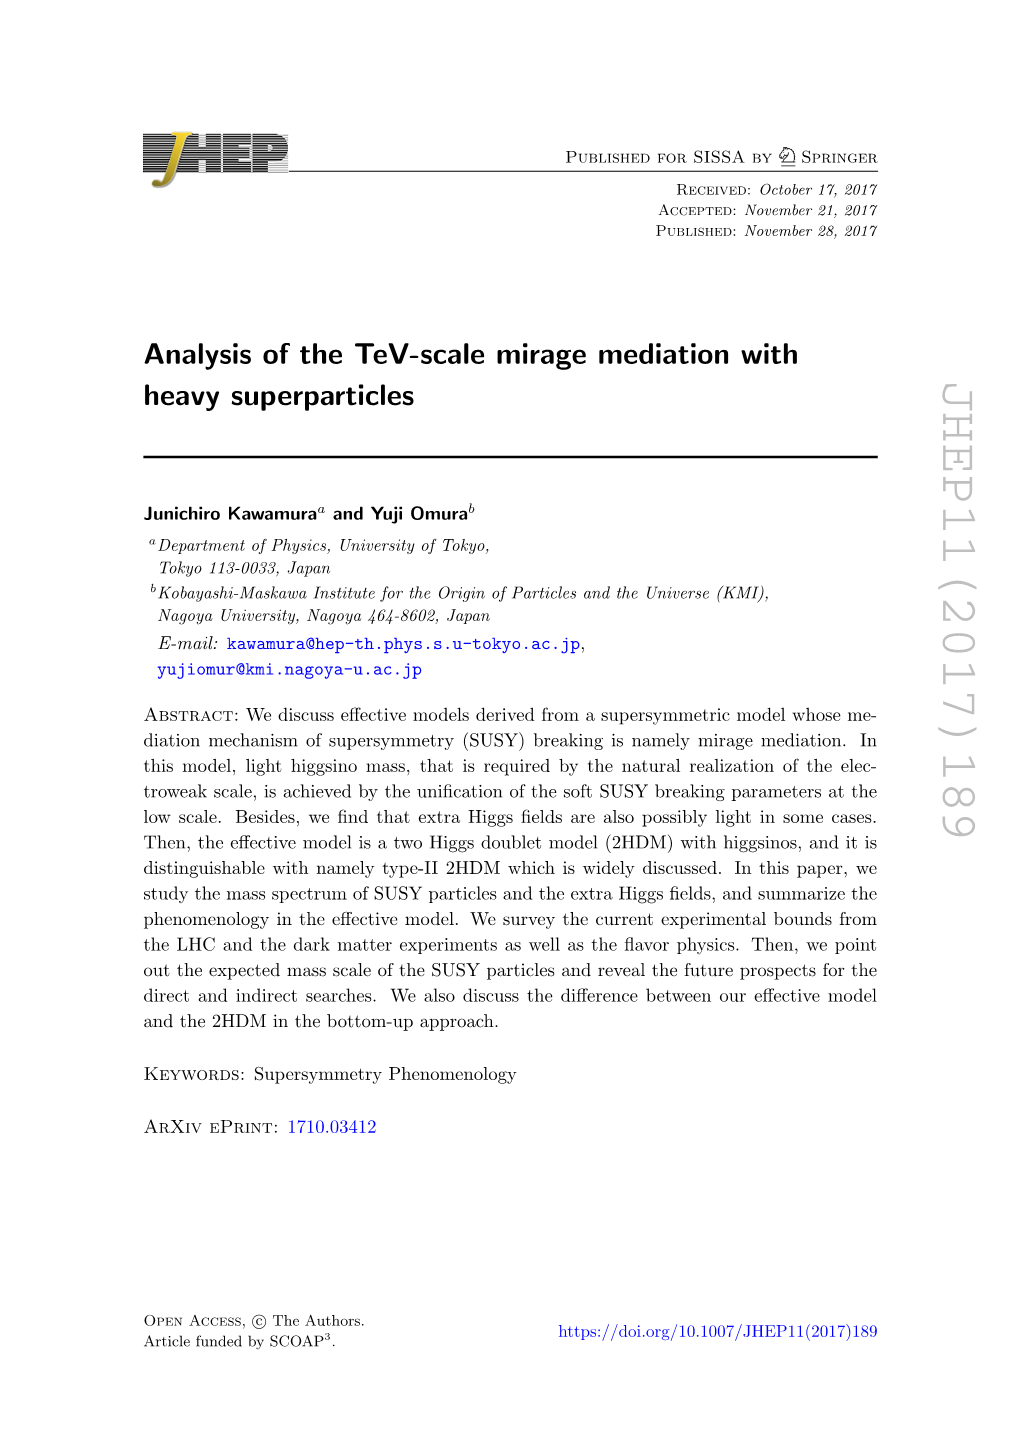 Analysis of the Tev-Scale Mirage Mediation with Heavy Superparticles